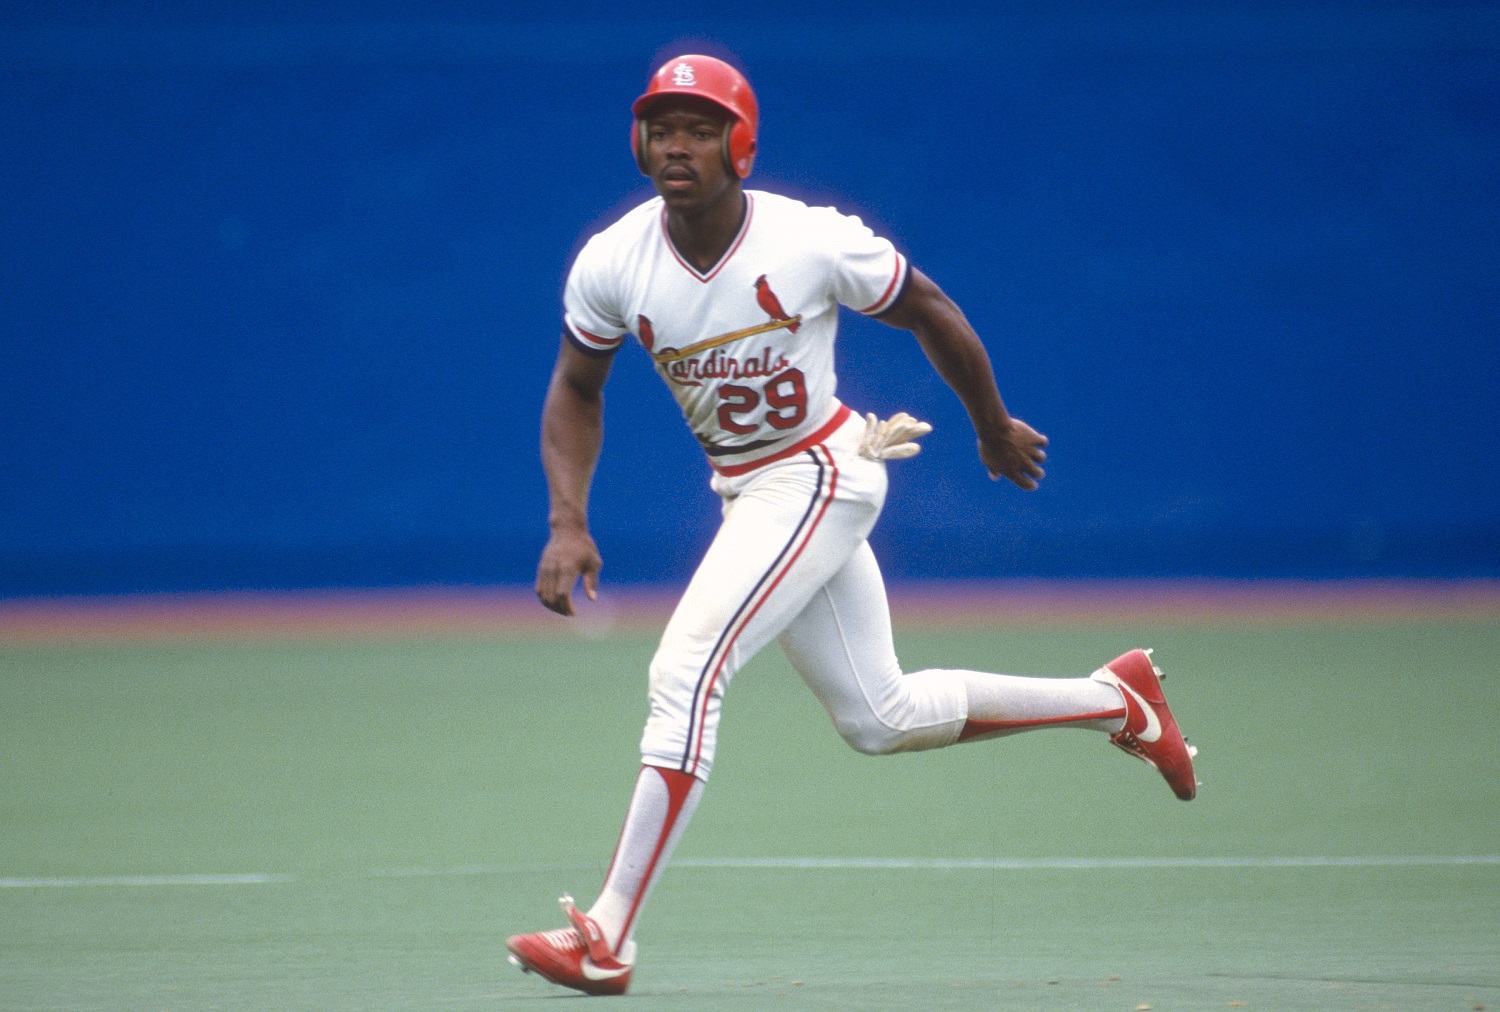 A Look Back on When Two-Time MLB All-Star Vince Coleman Threw a Lit Firecracker Near a Group of Fans at Dodger Stadium